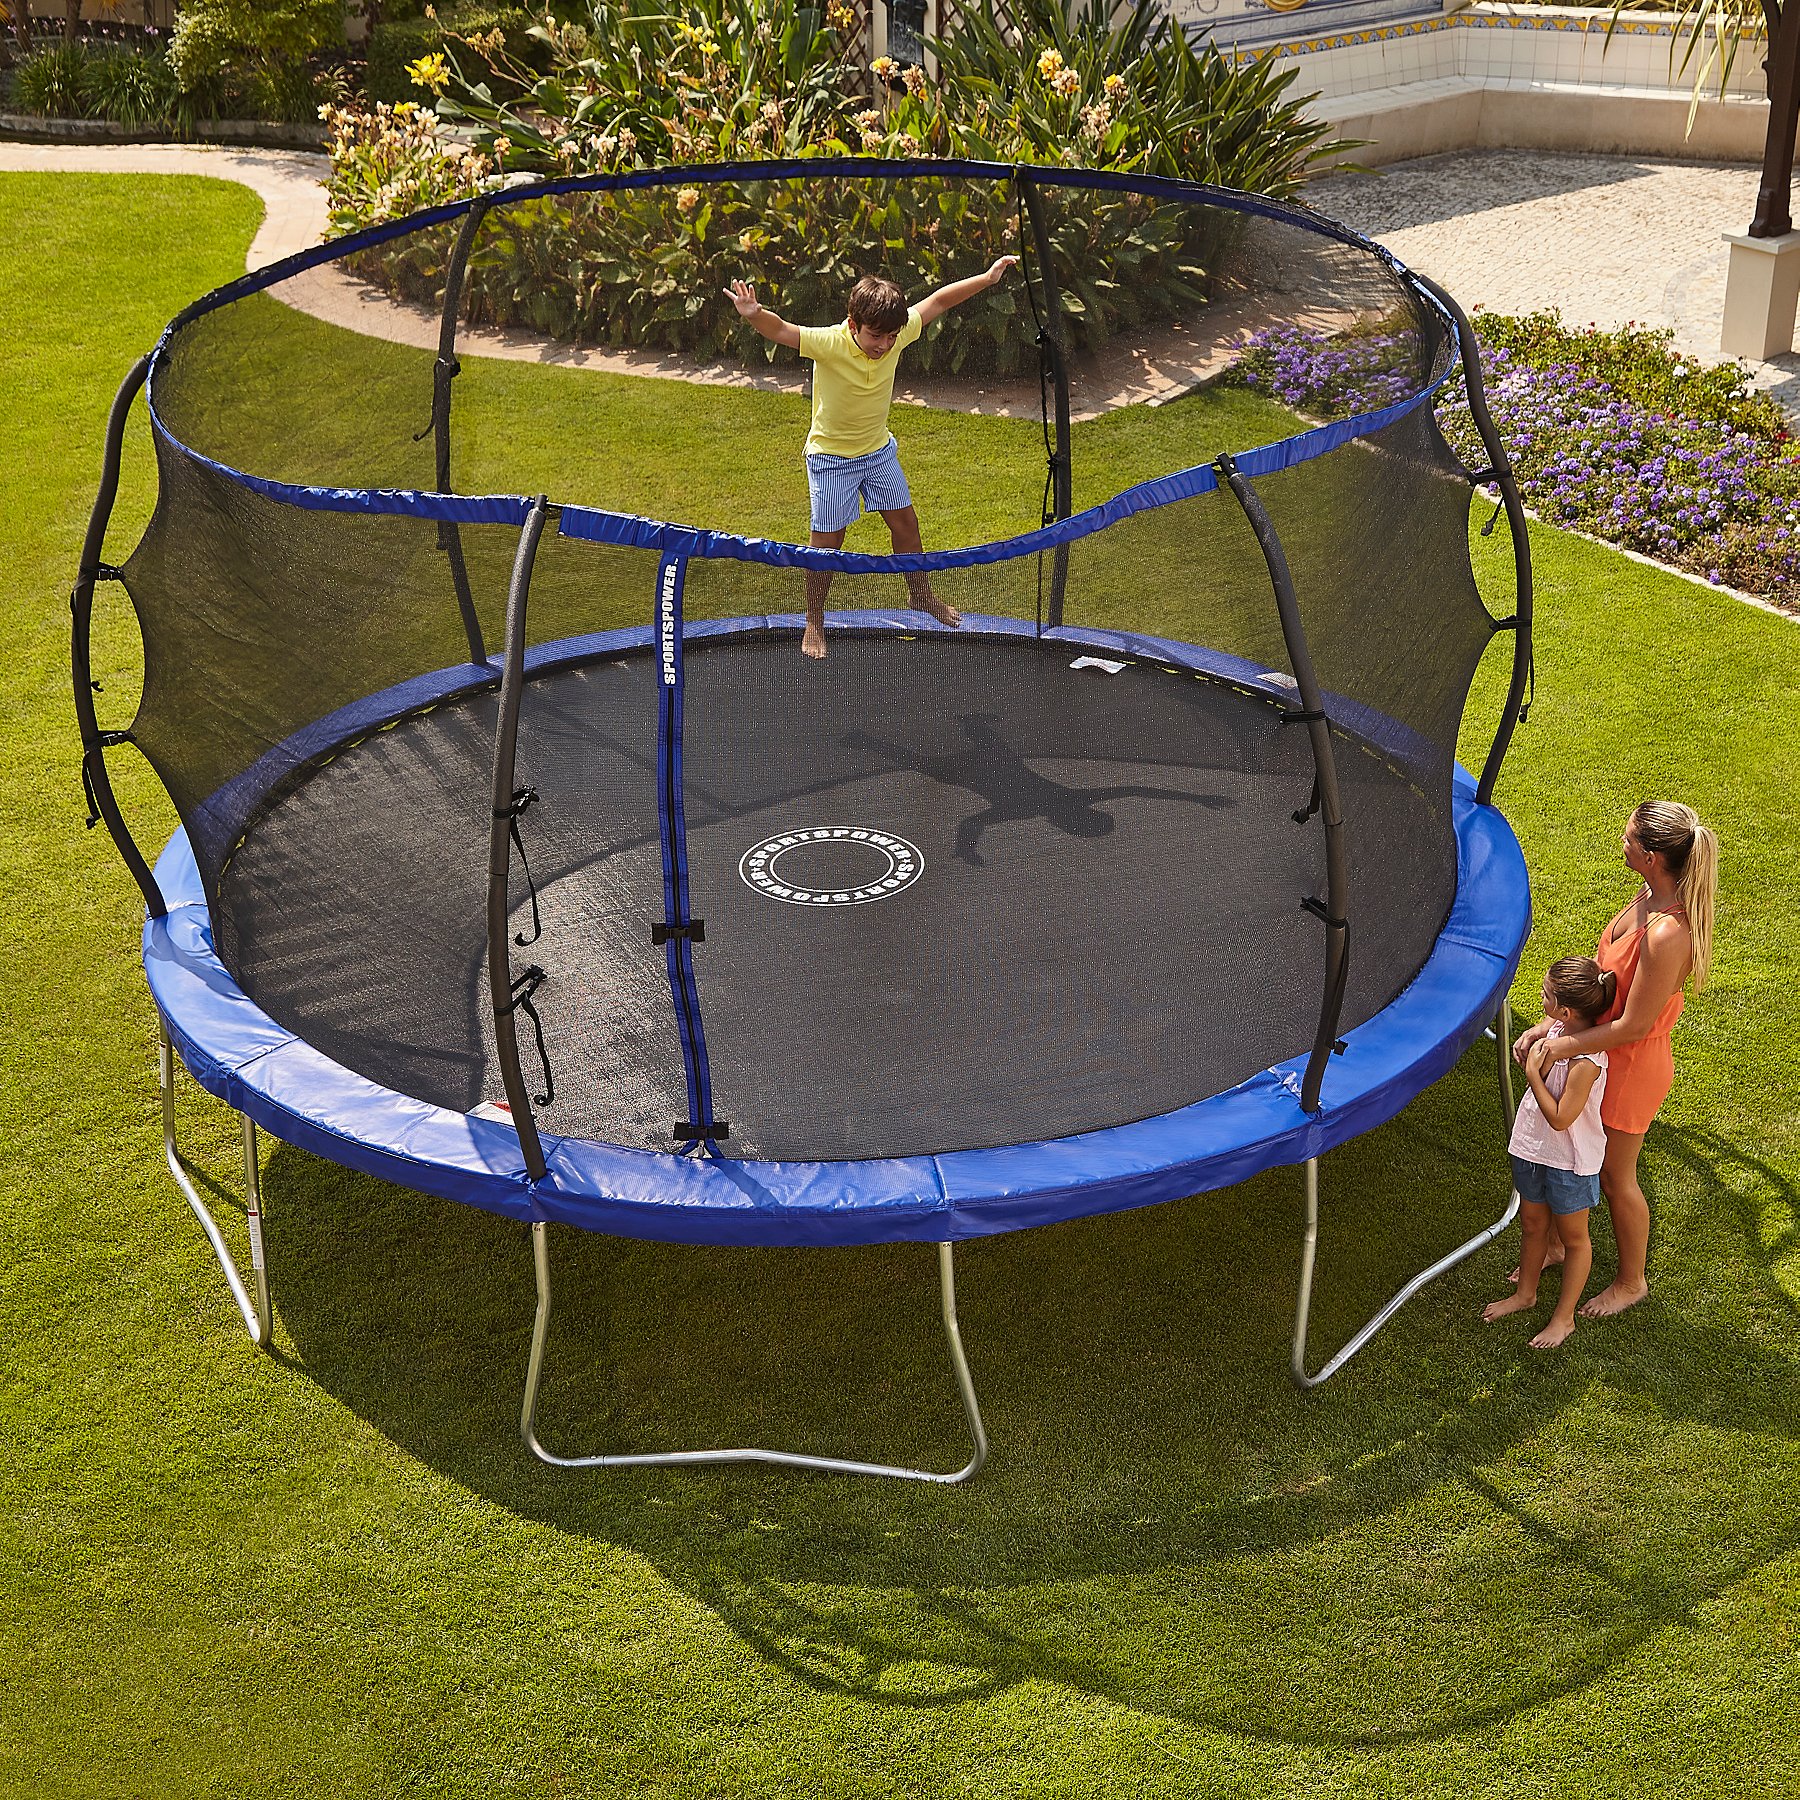 How To Put A 14ft Trampoline Together